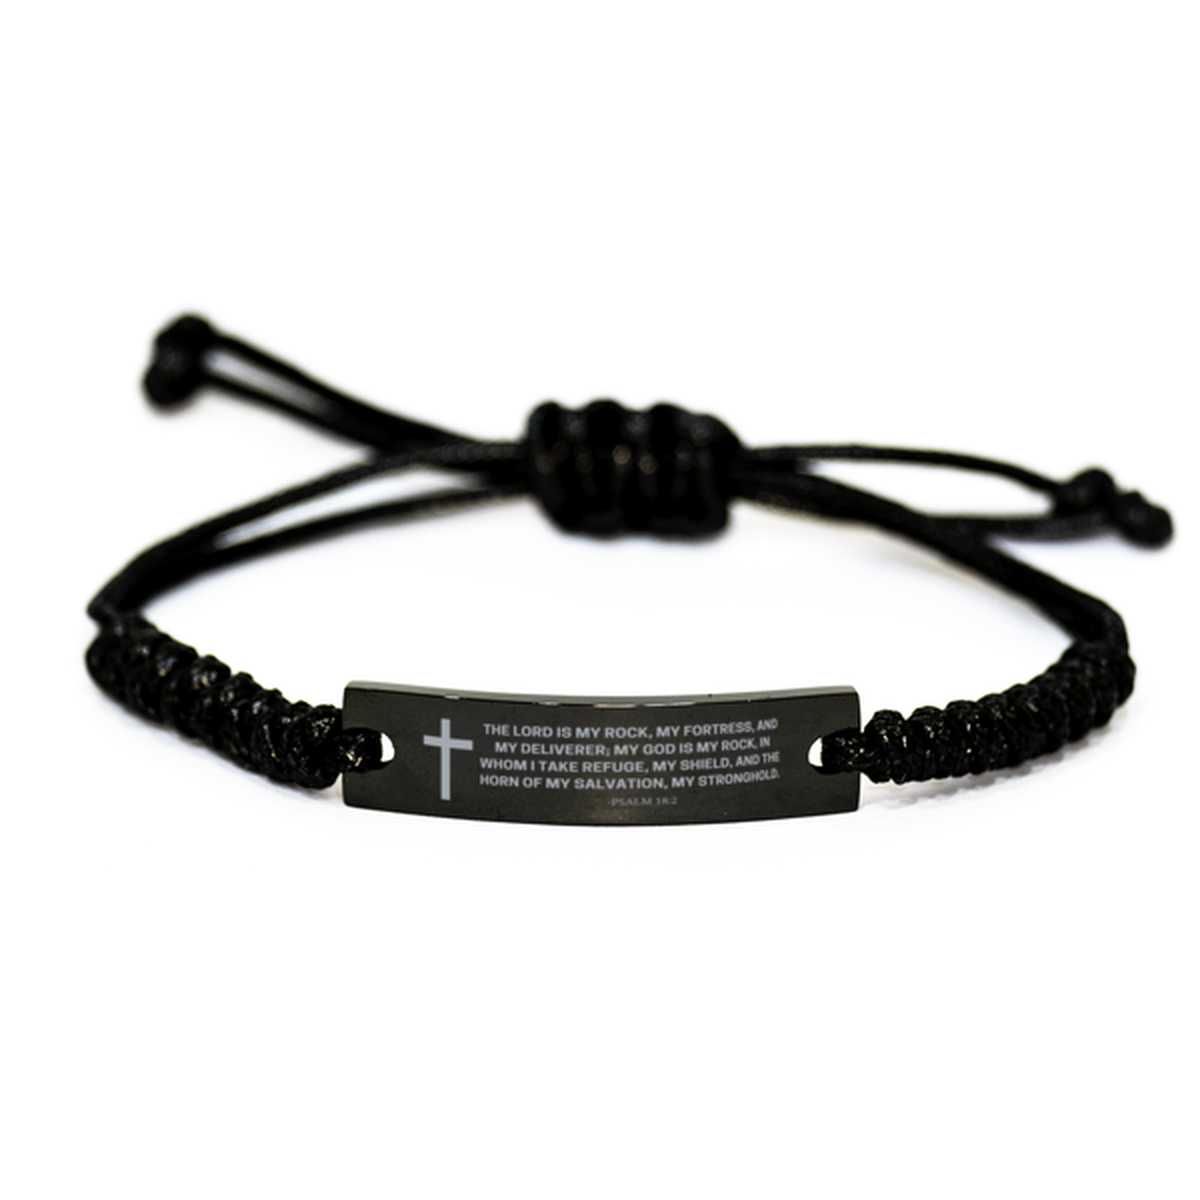 Baptism Gifts For Teenage Boys Girls, Christian Bible Verse Black Rope Bracelet, The Lord is my rock, Catholic Confirmation Gifts for Son, Godson, Grandson, Nephew